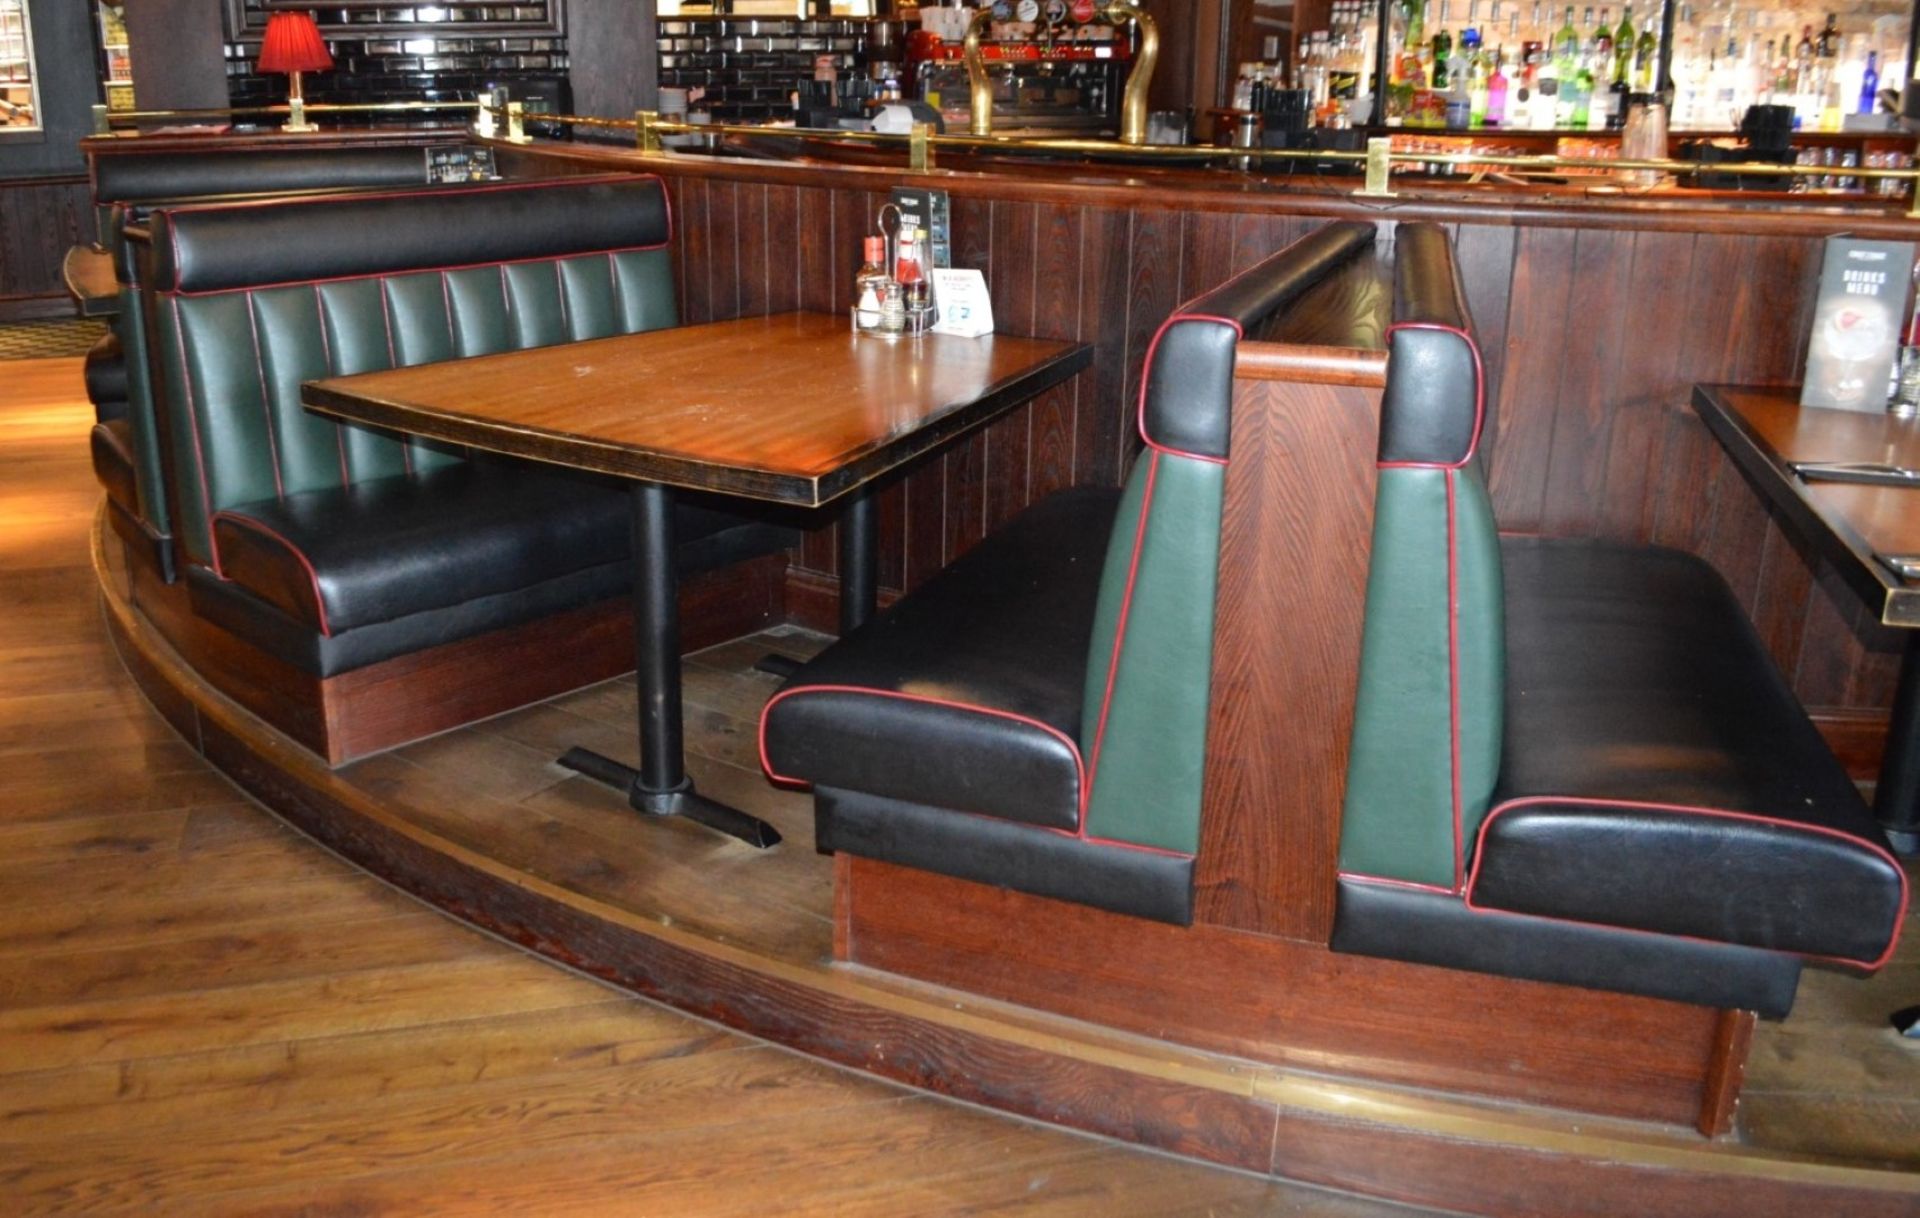 4 x Sections of Restaurant Booth Seating and 3 x Restaraunt Tables With Cast Iron Bases - Include